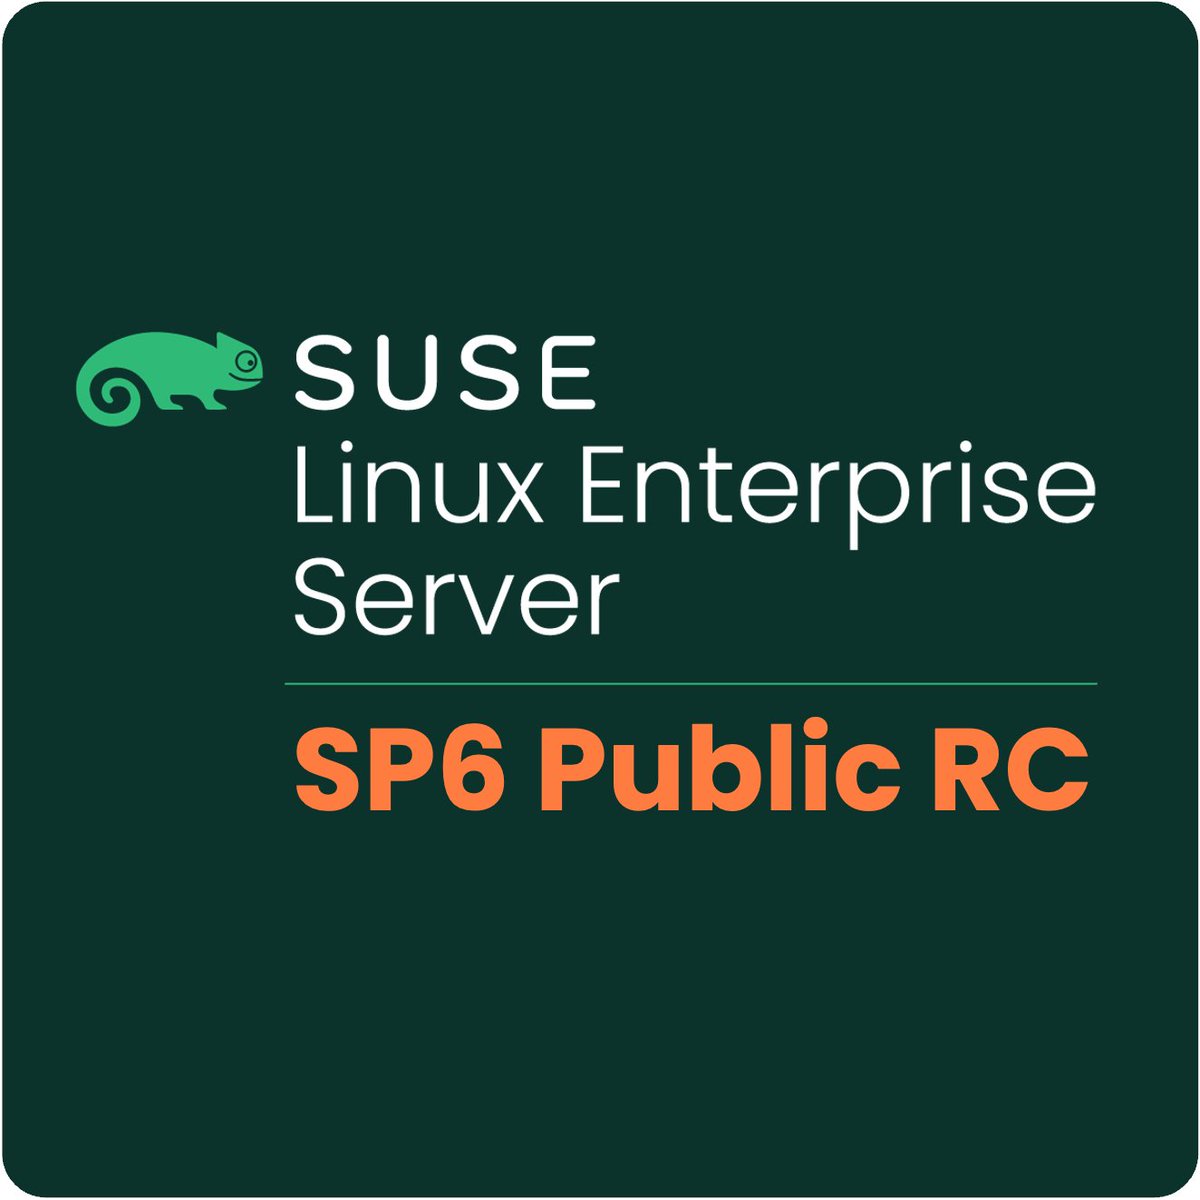 #SLES 15 SP6 Public Release Candidate is now available, representing a comprehensive refresh of @SUSE flagship suite of enterprise products and extensions, including those for #SAP, #HighAvailability, #HighPerformanceComputing, and #Linux-based desktops.👉okt.to/FgRti4